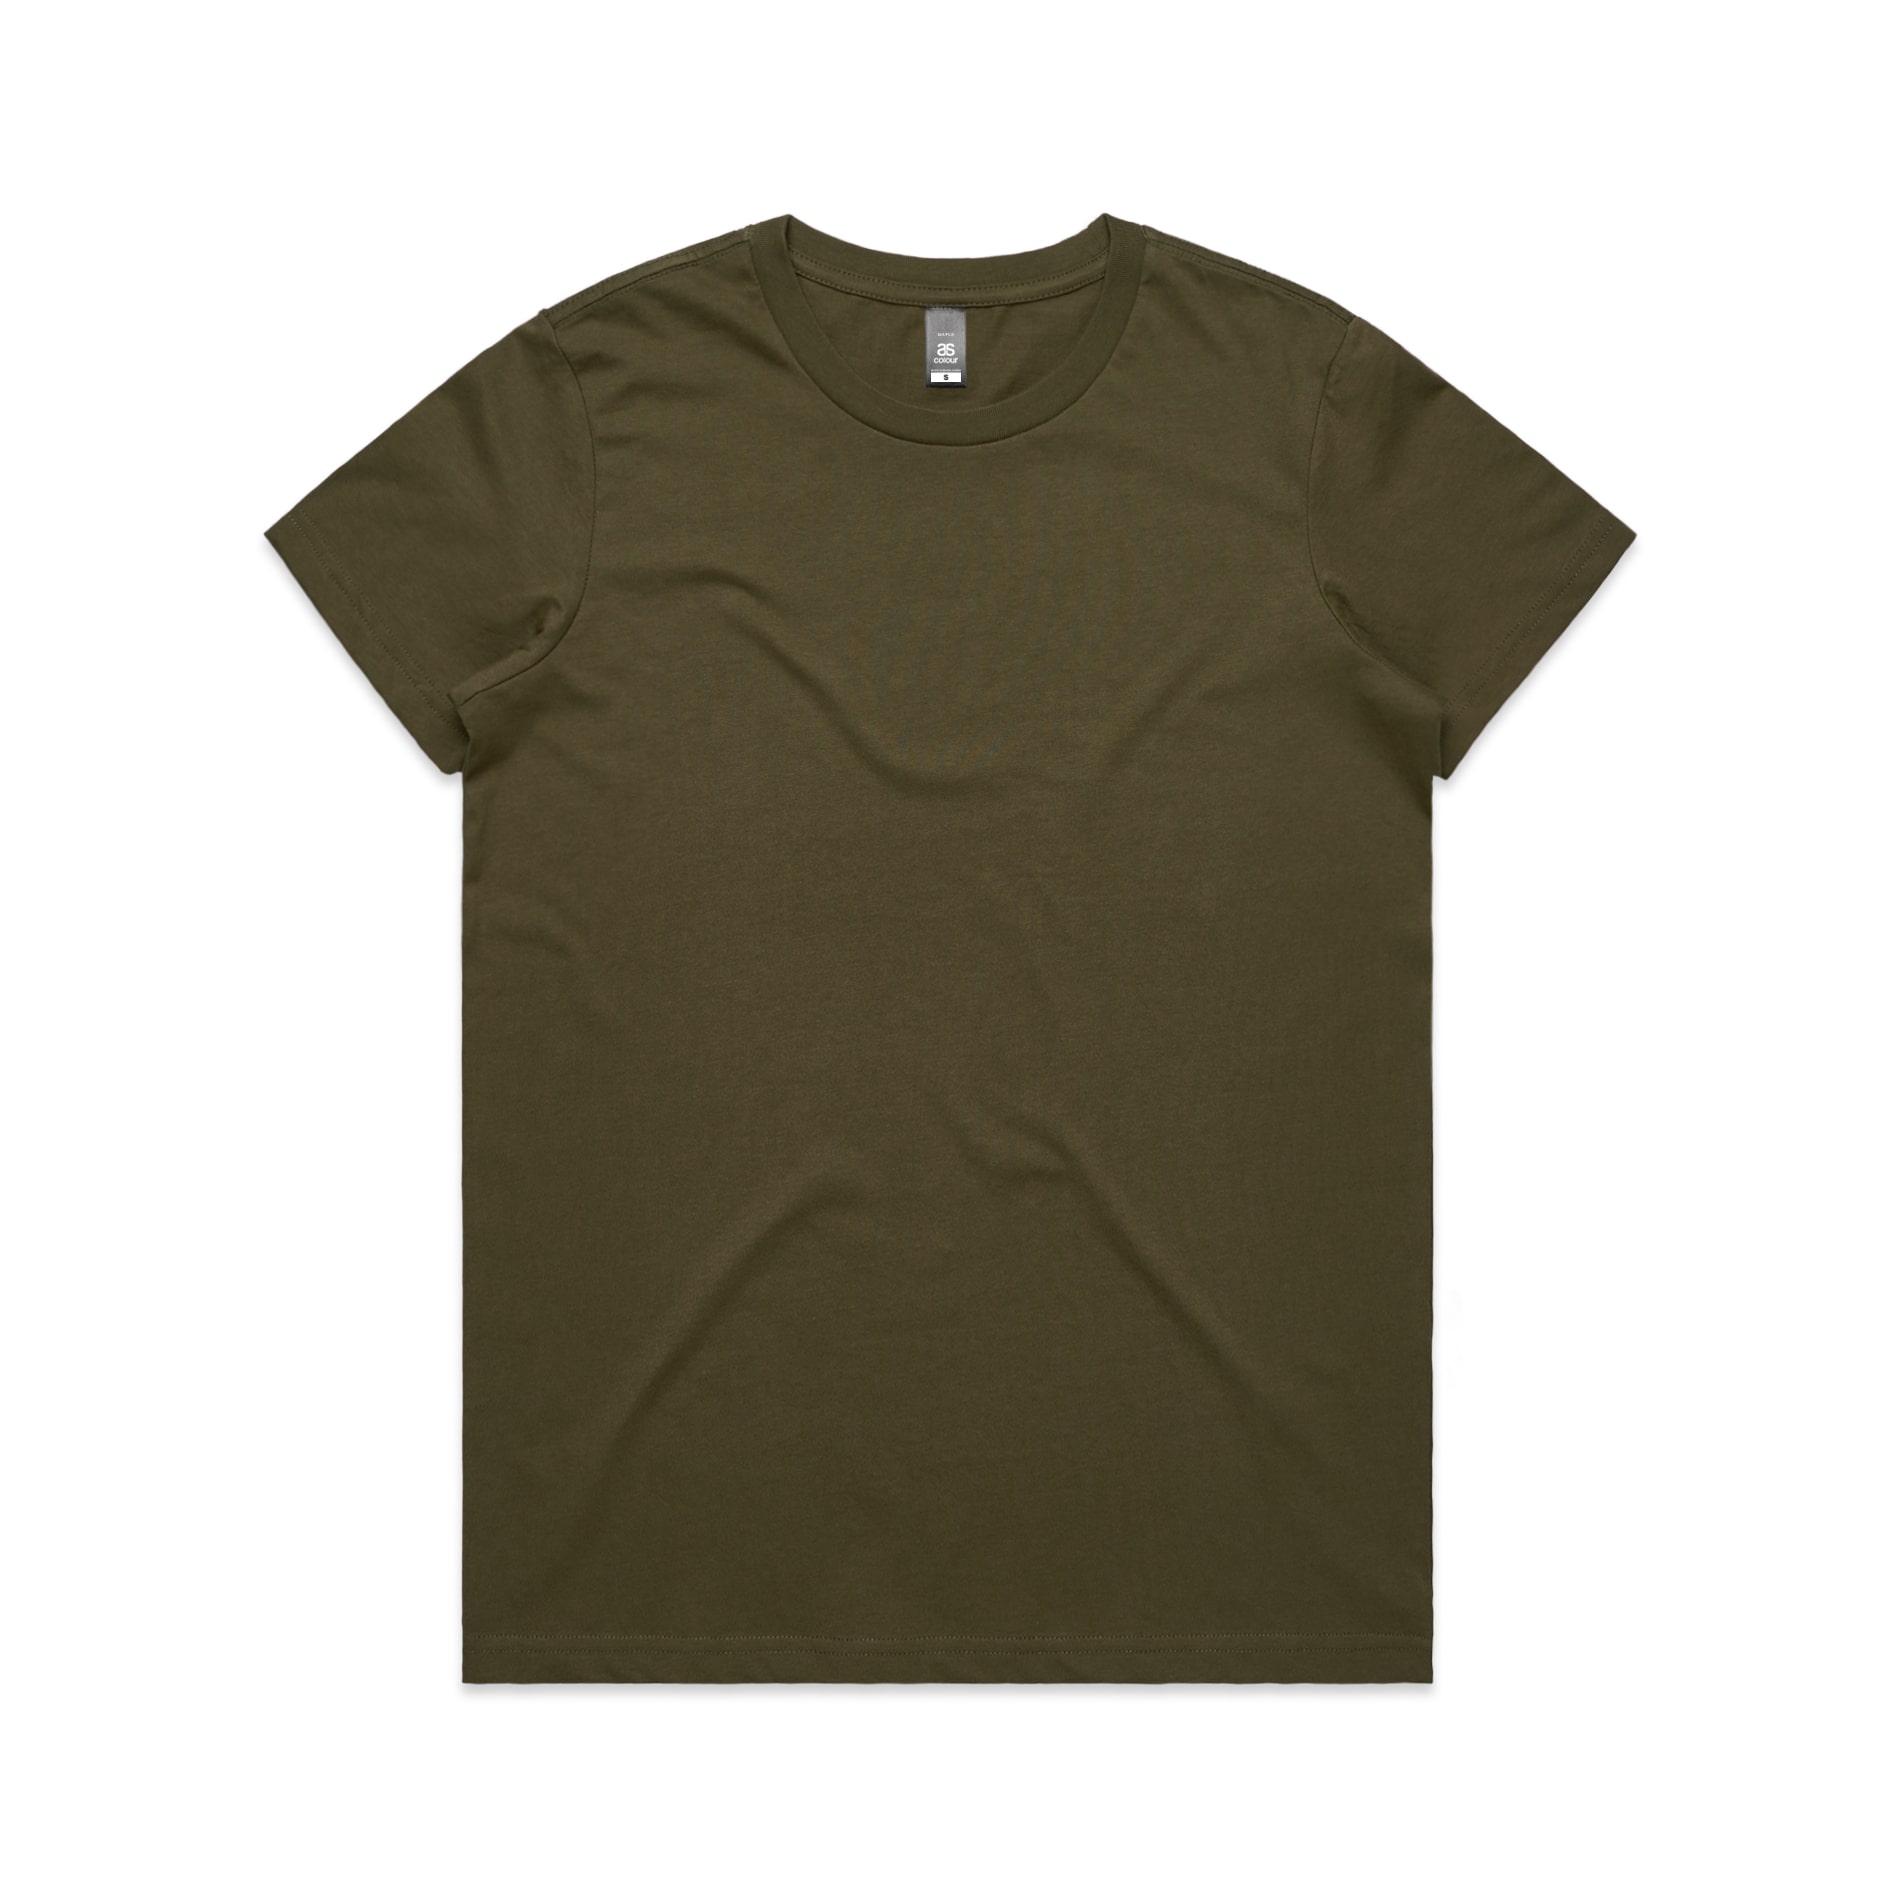 Design online product - 4001 maple tee army